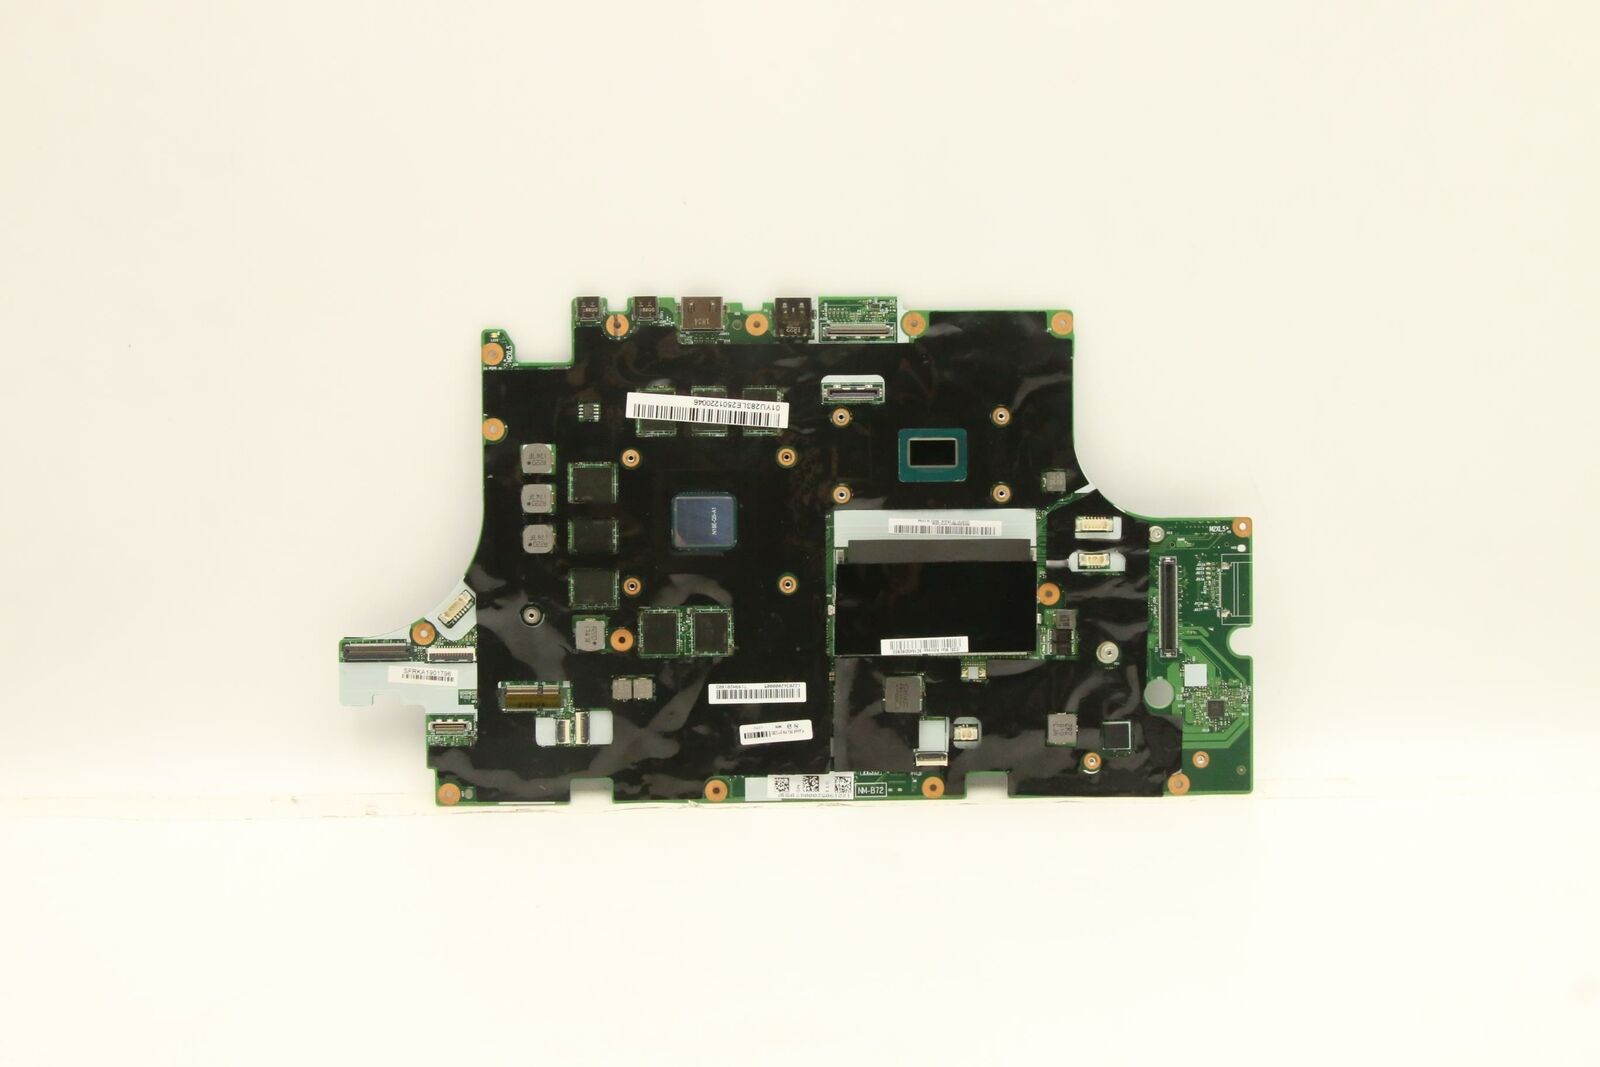 Lenovo Motherboard for Thinkpad Laptop, Part #: 01YU283 Information Technology DEX 